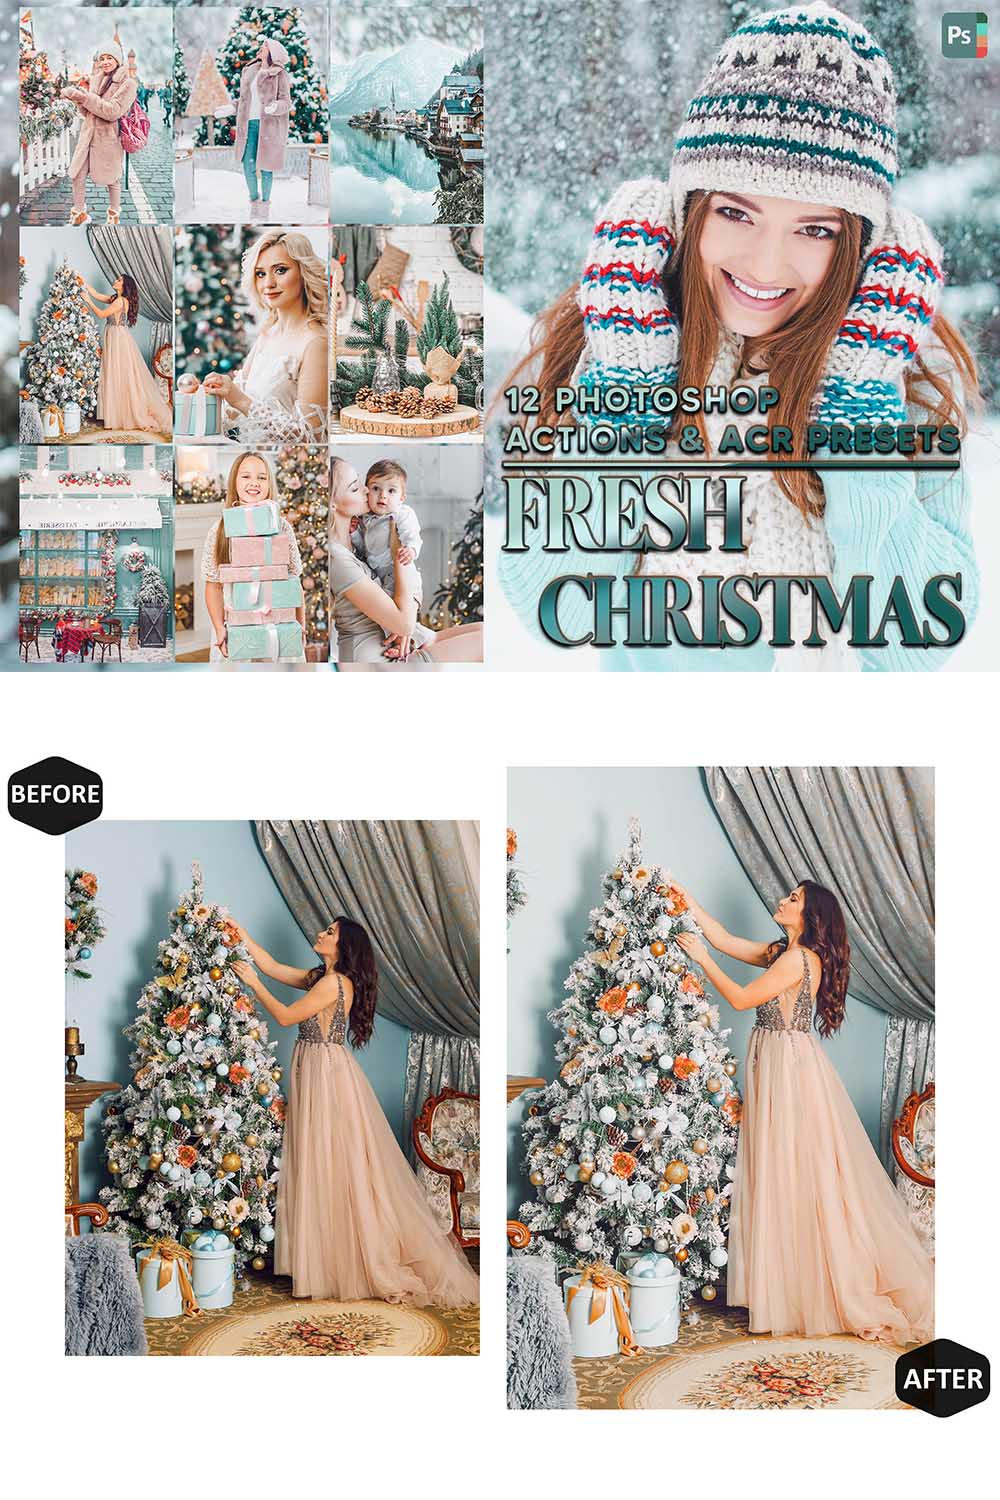 12 Photoshop Actions, Fresh Christmas Ps Action, Holiday ACR Preset, Green And Blue Ps Filter, Atn Portrait And Lifestyle Theme For Instagram, Blogger pinterest preview image.